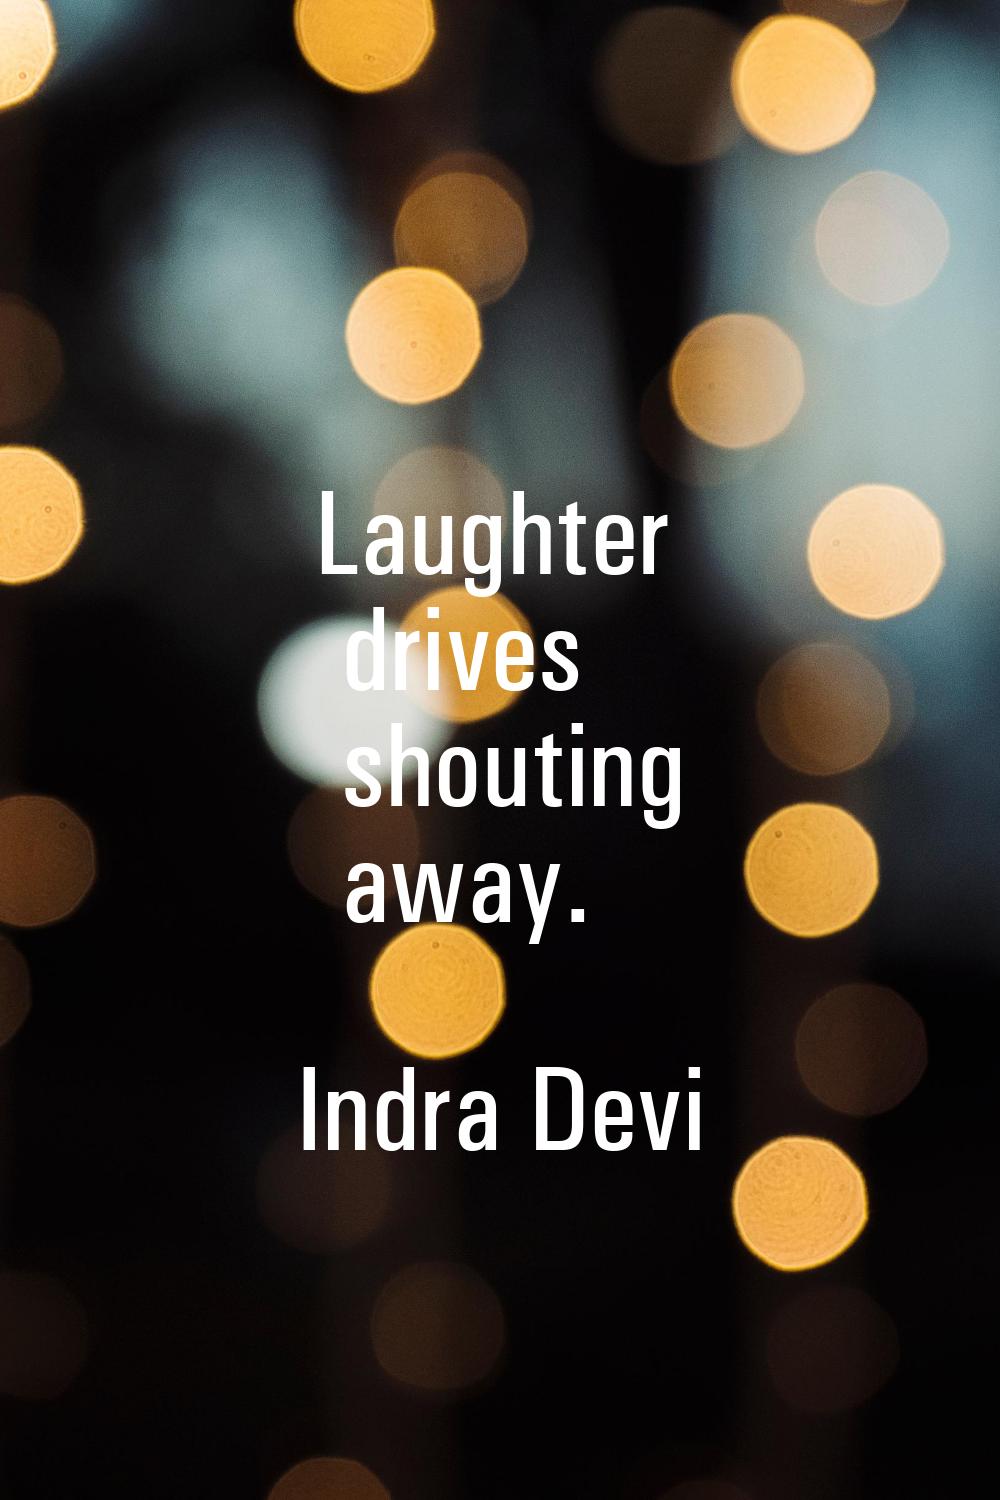 Laughter drives shouting away.